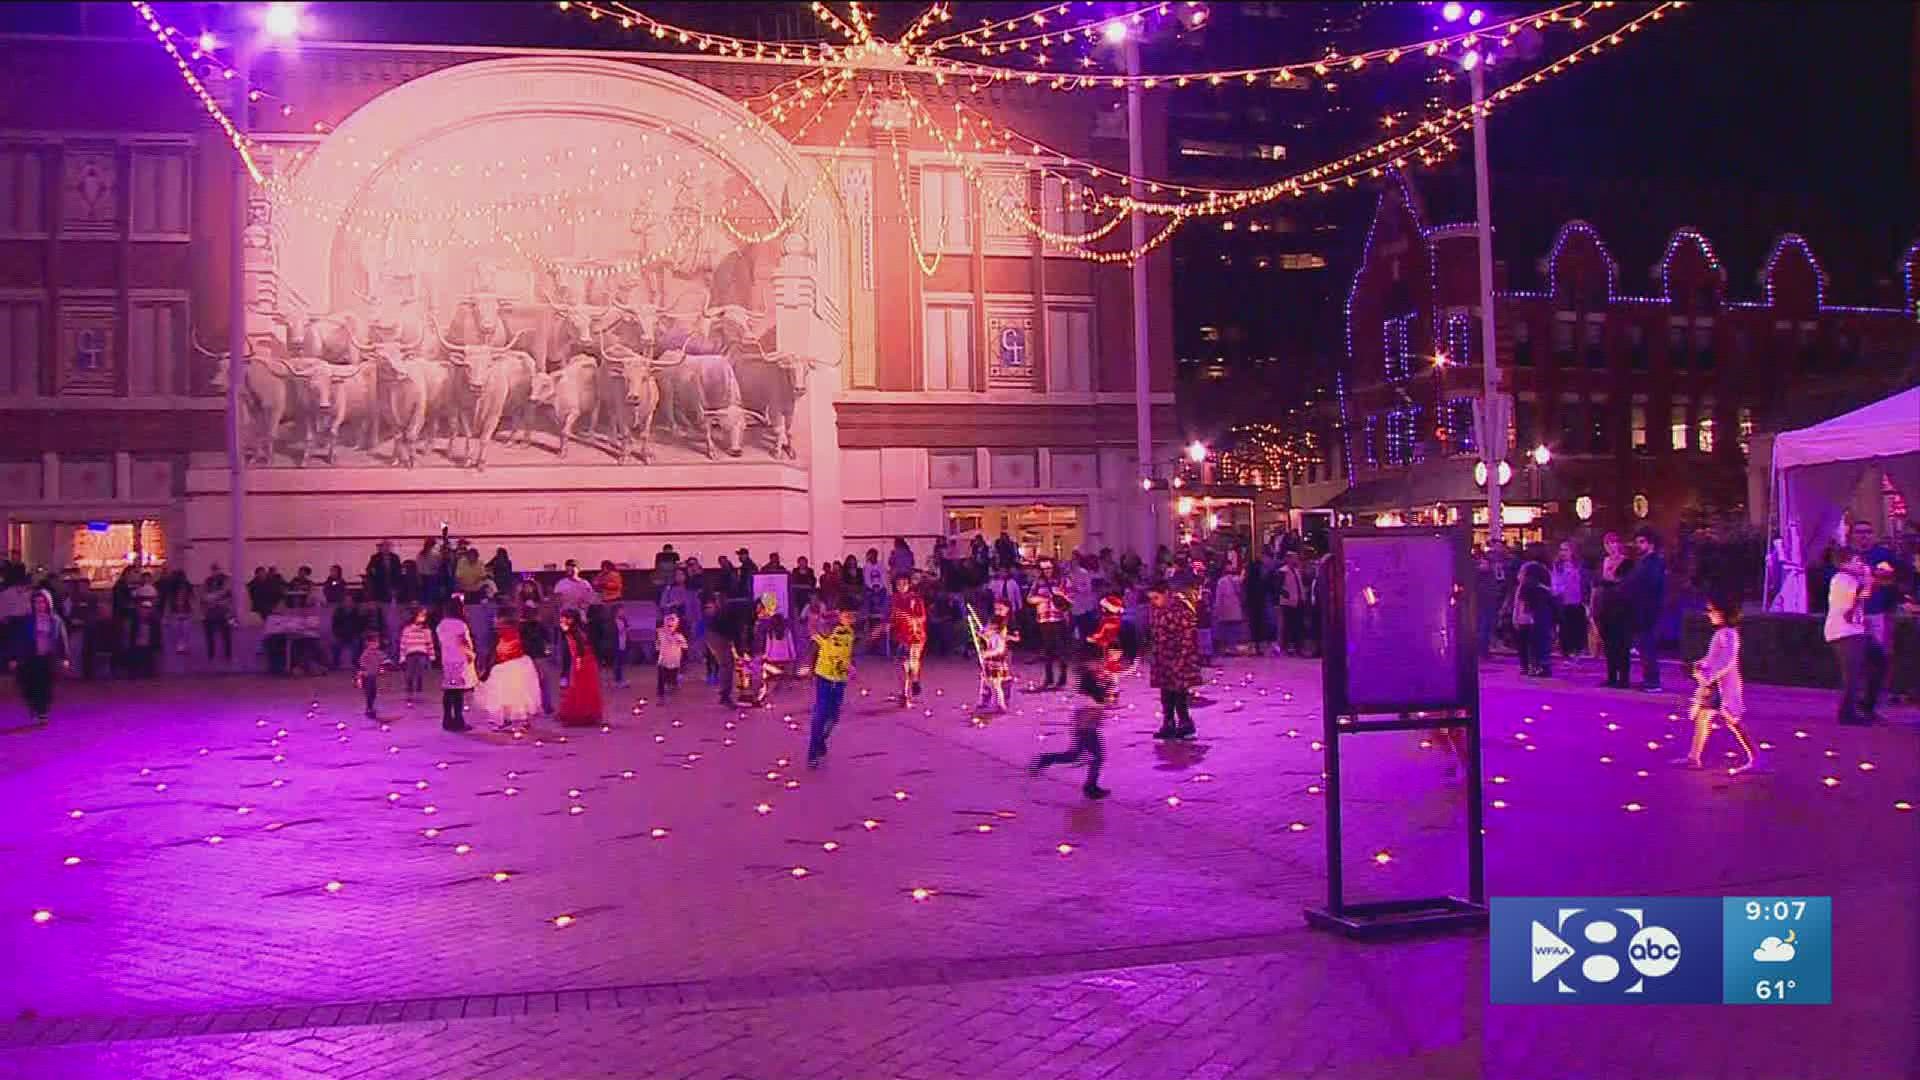 Celebrating New Year's Eve at Sundance Square in Fort Worth